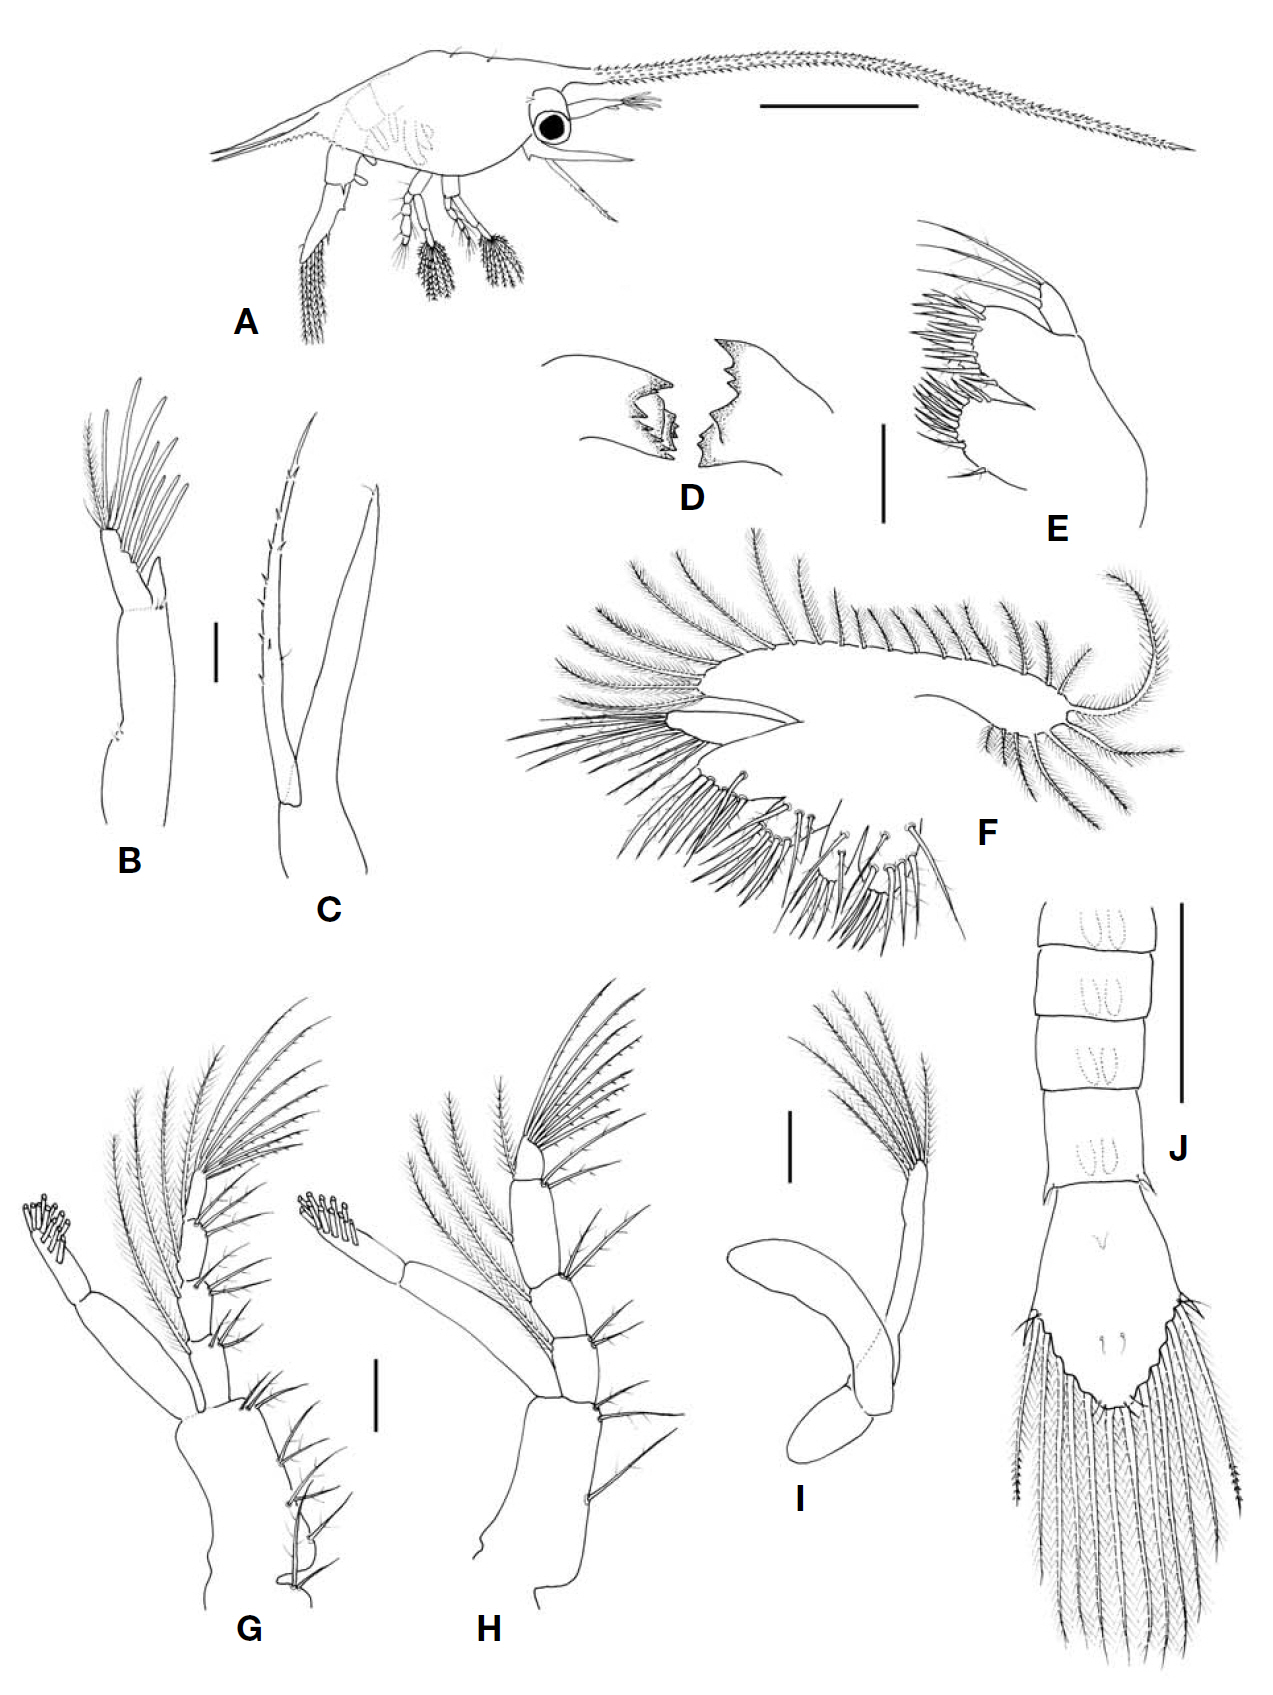 Pisidia serratifrons second zoeal stage. A Lateral view of the entire animal; B Antennule; C Antenna; D Mandibles; EMaxillule; F Maxilla; G First maxilliped; H Second maxilliped; I Third maxilliped; J Dorsal view of the abdomen and telson. Scale bars: A=1 mm B-I=0.1 mm J=0.5 mm.